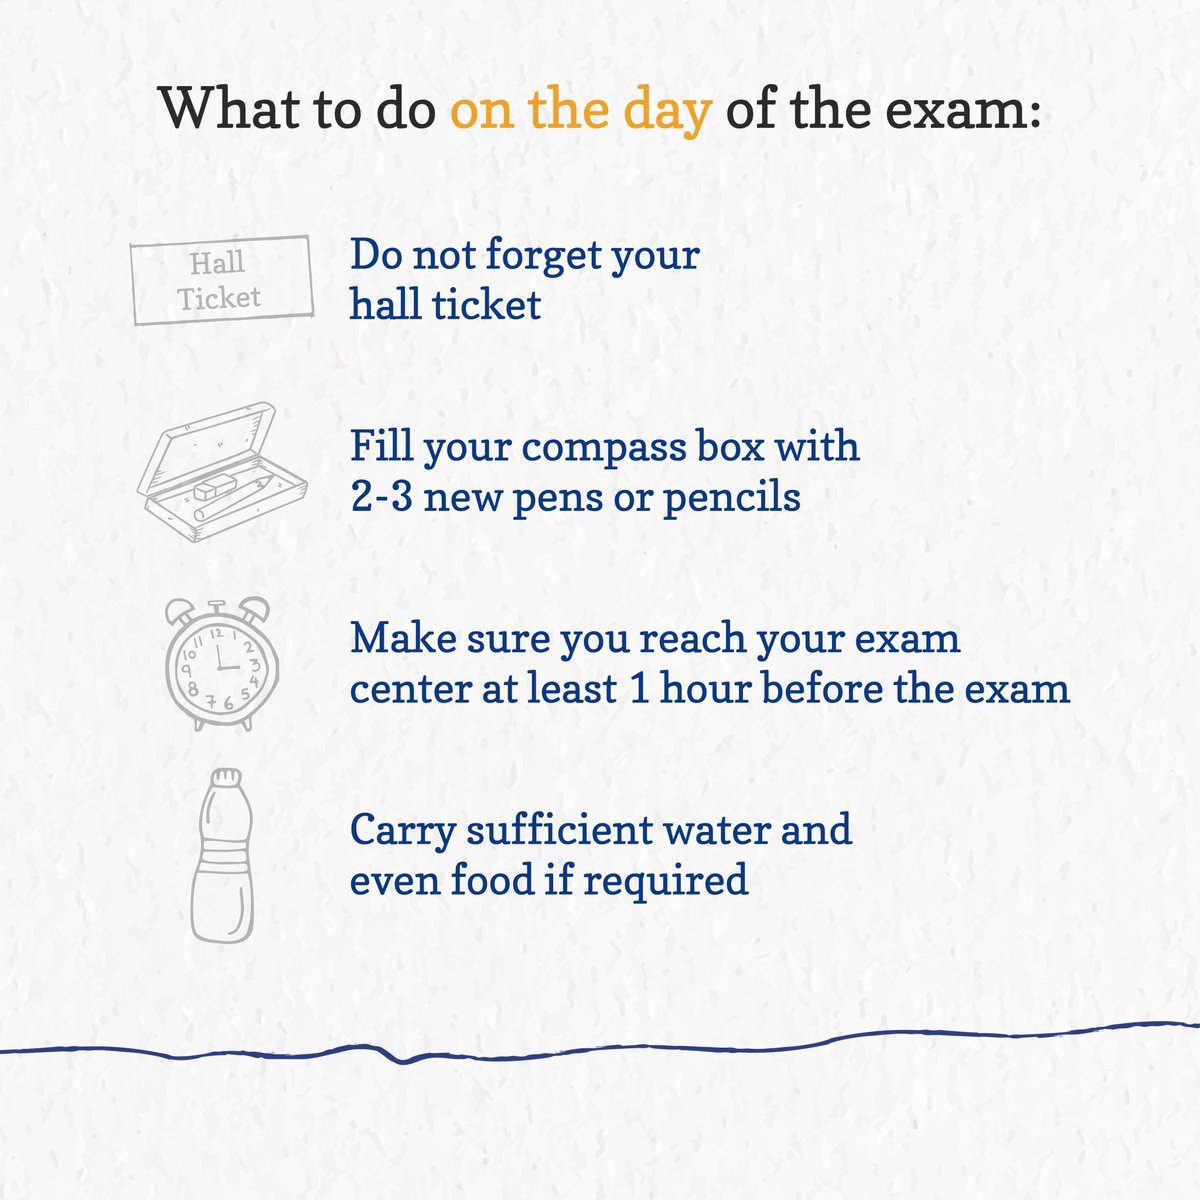 As the Board Exams approach, here are some tips to ensure a smooth journey through this crucial time. We wish everyone all the very best for your Board Exams💯 Remember, confidence & calm will take you places🙌

#BoardExam #BoardExamTips #AllTheBest #DMWA #DattaMegheWorldAcademy